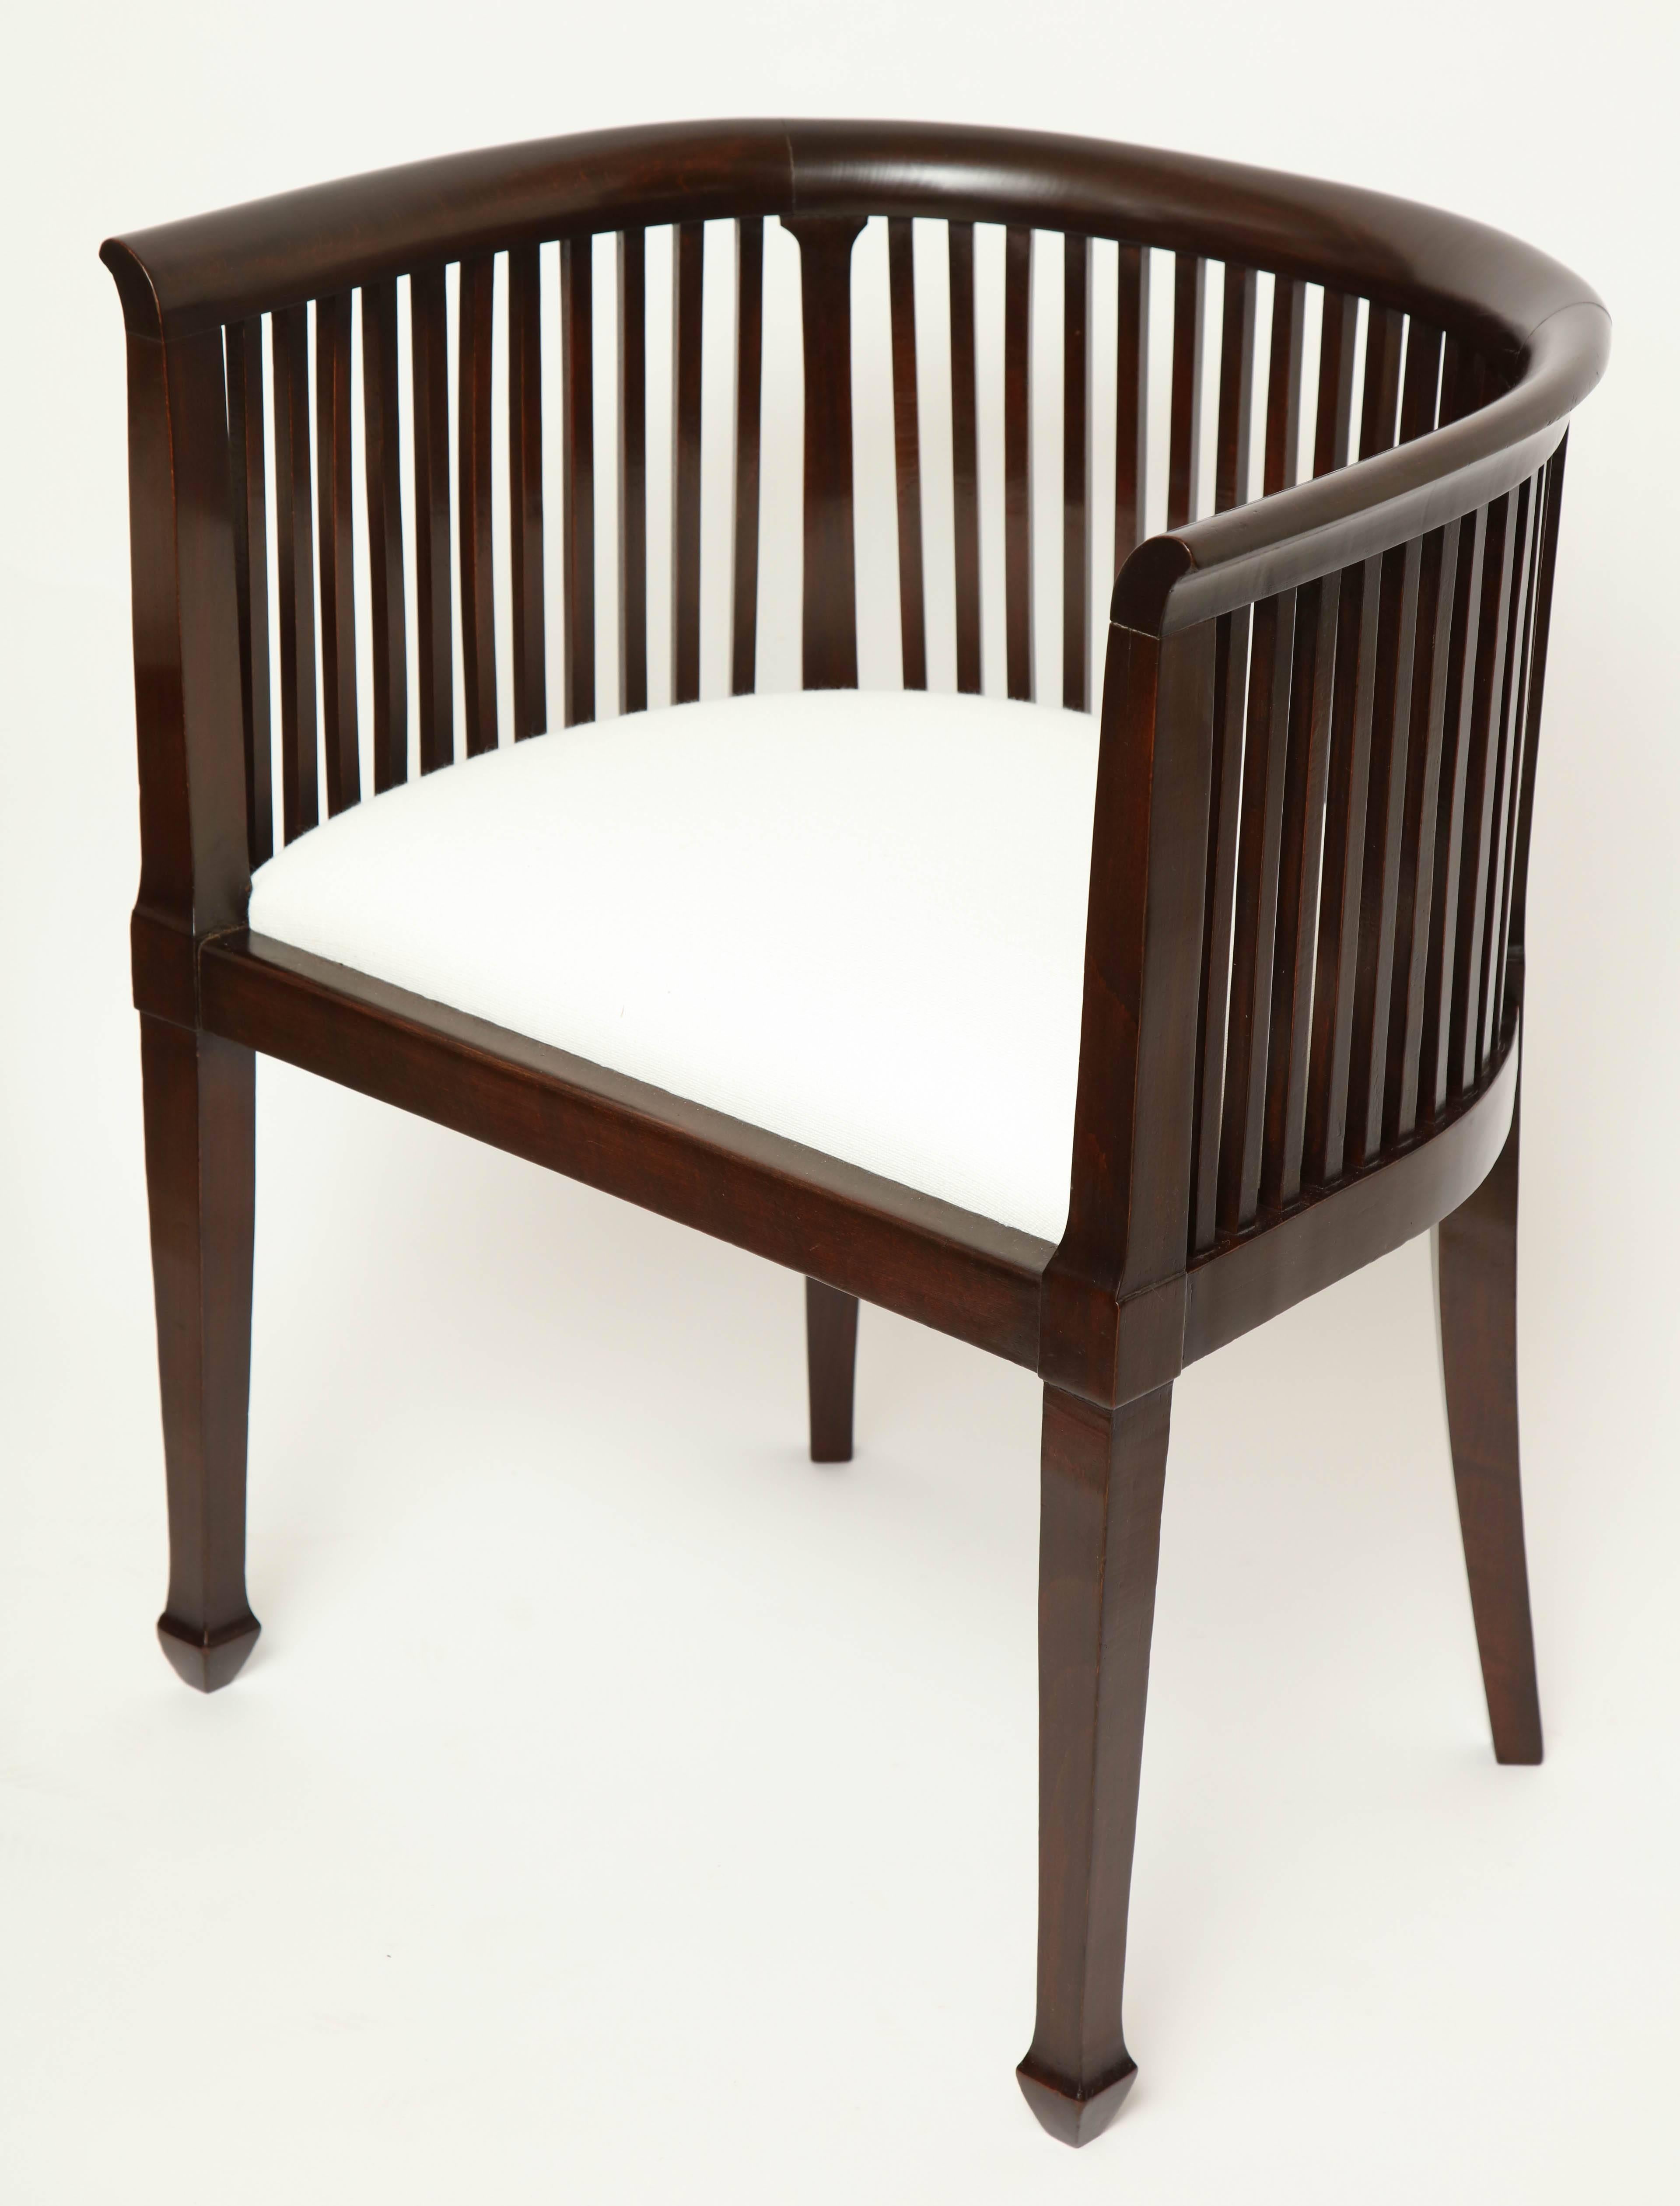 Mid-20th Century Pair of Slatted and Curved Back Mahogany Chairs, France, circa 1940s